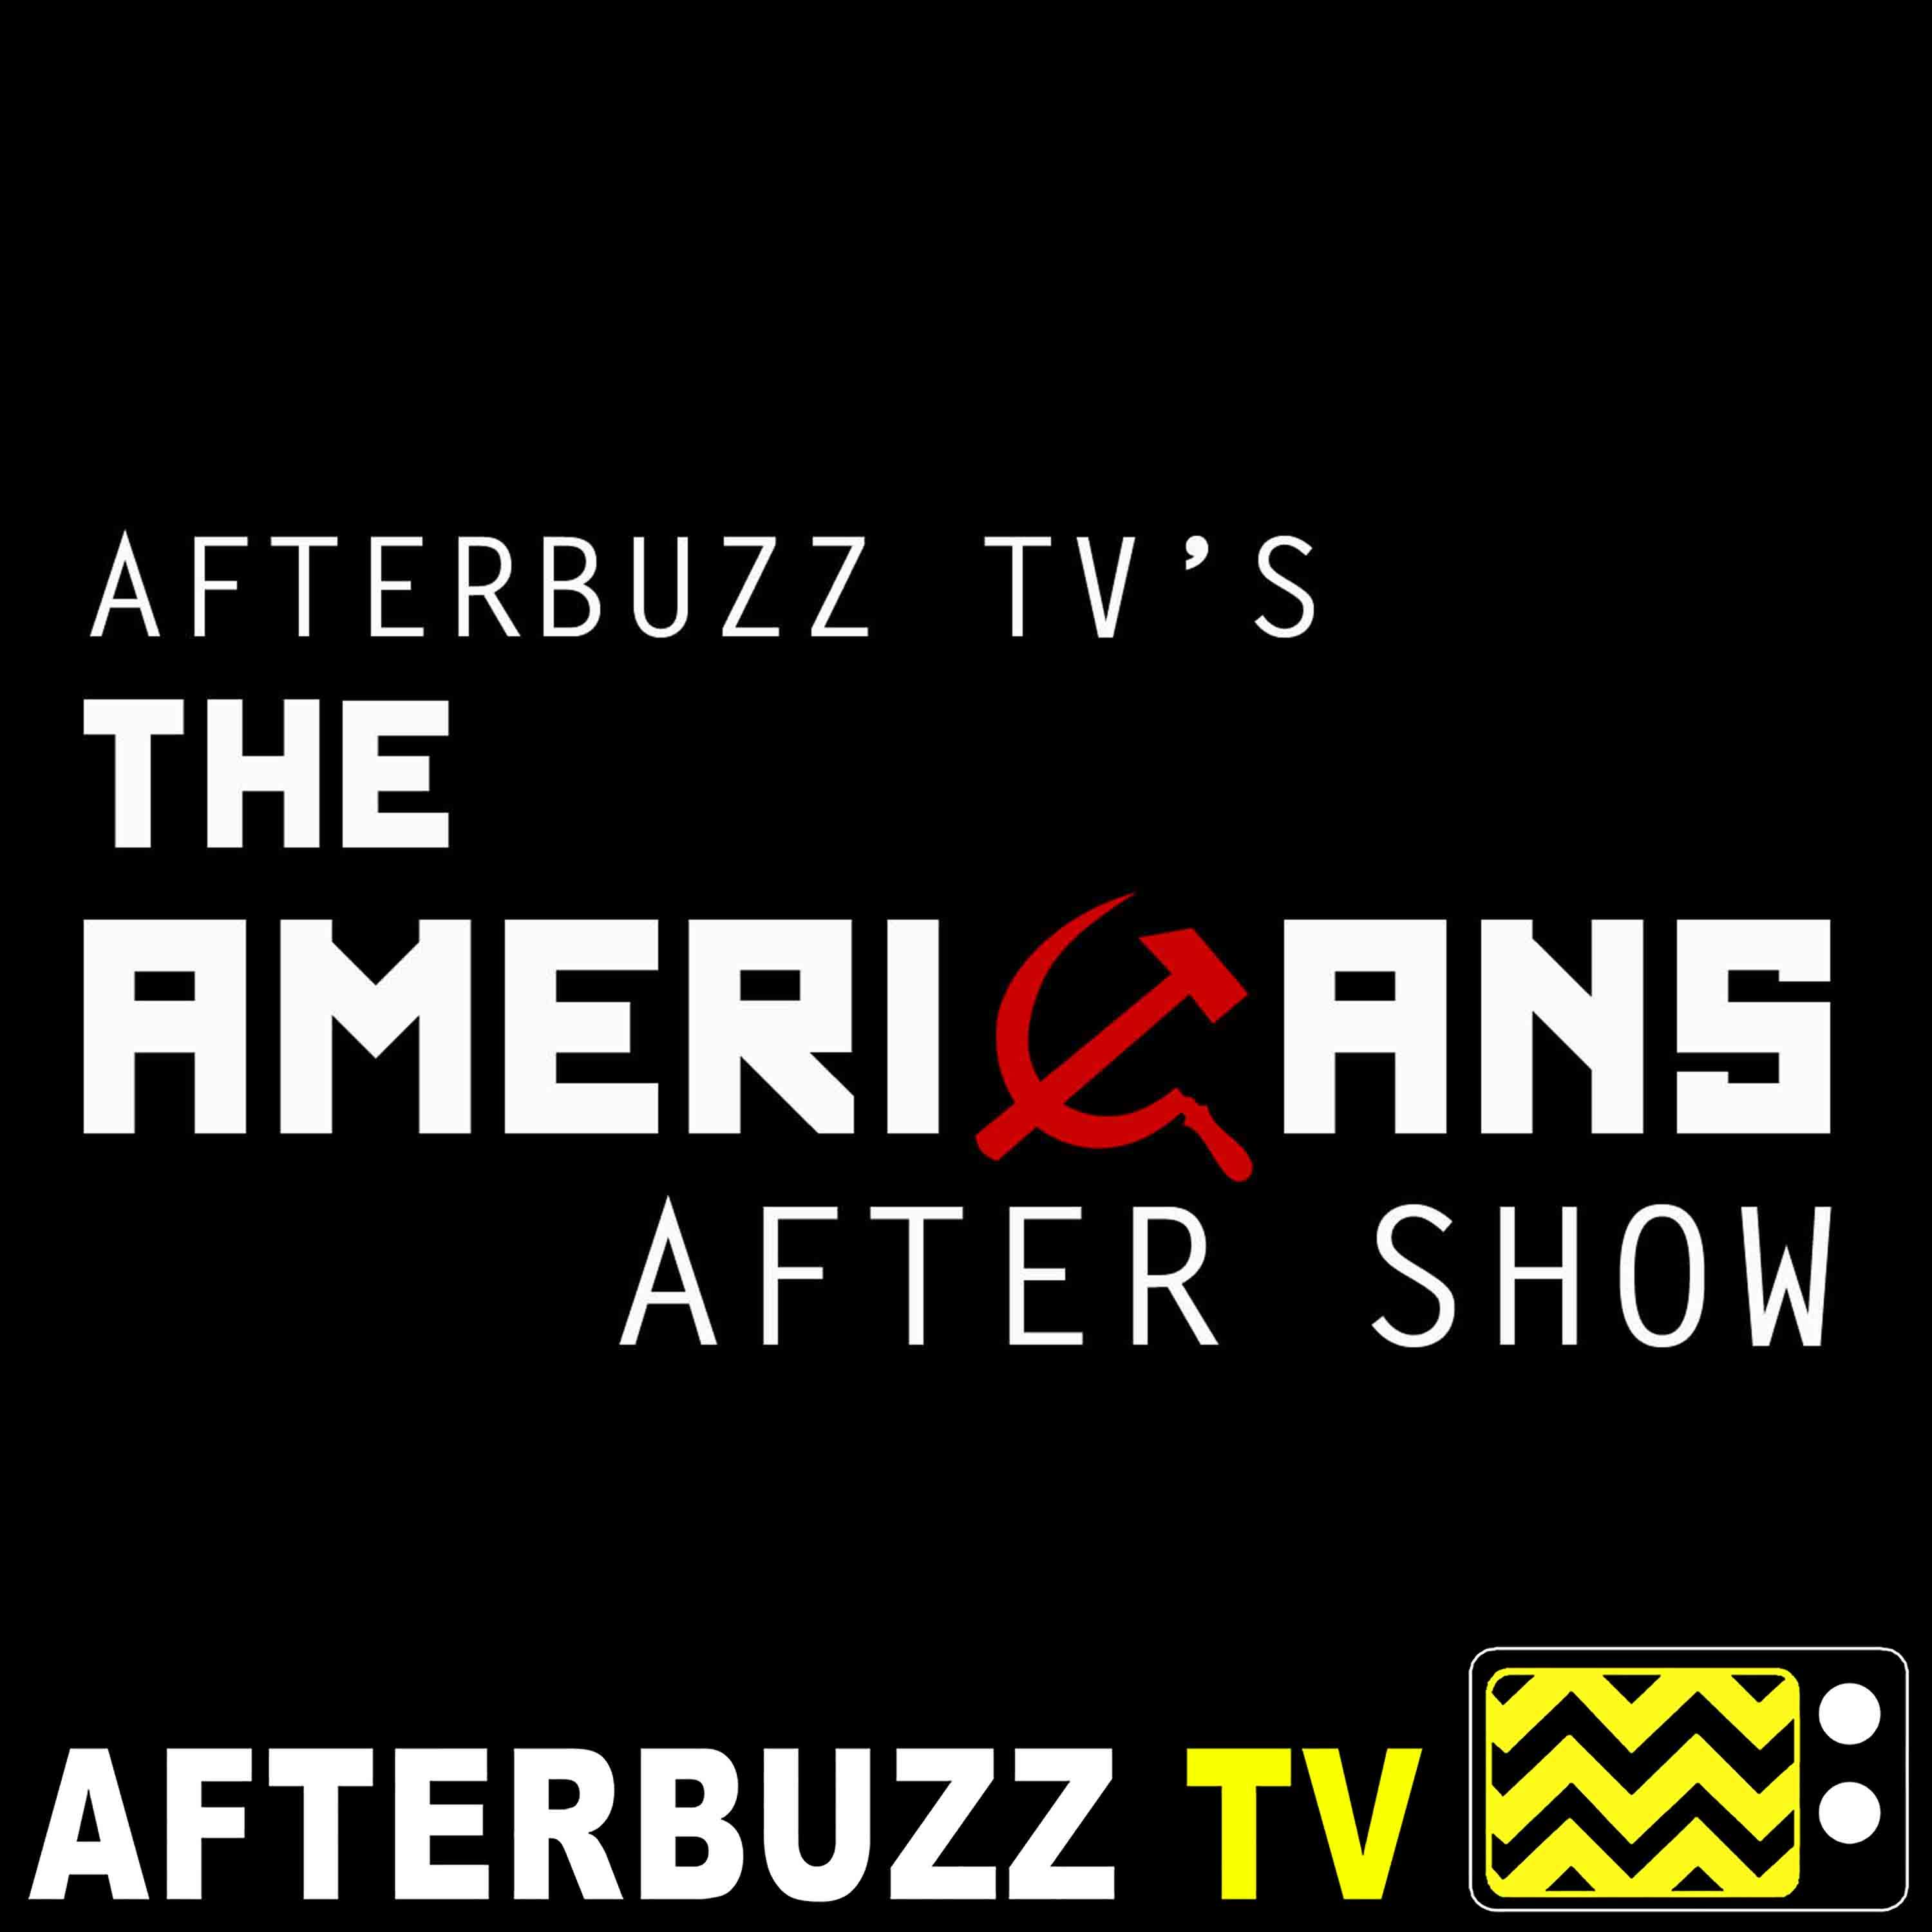 The Americans S:5 | IHOP E:9 | AfterBuzz TV AfterShow